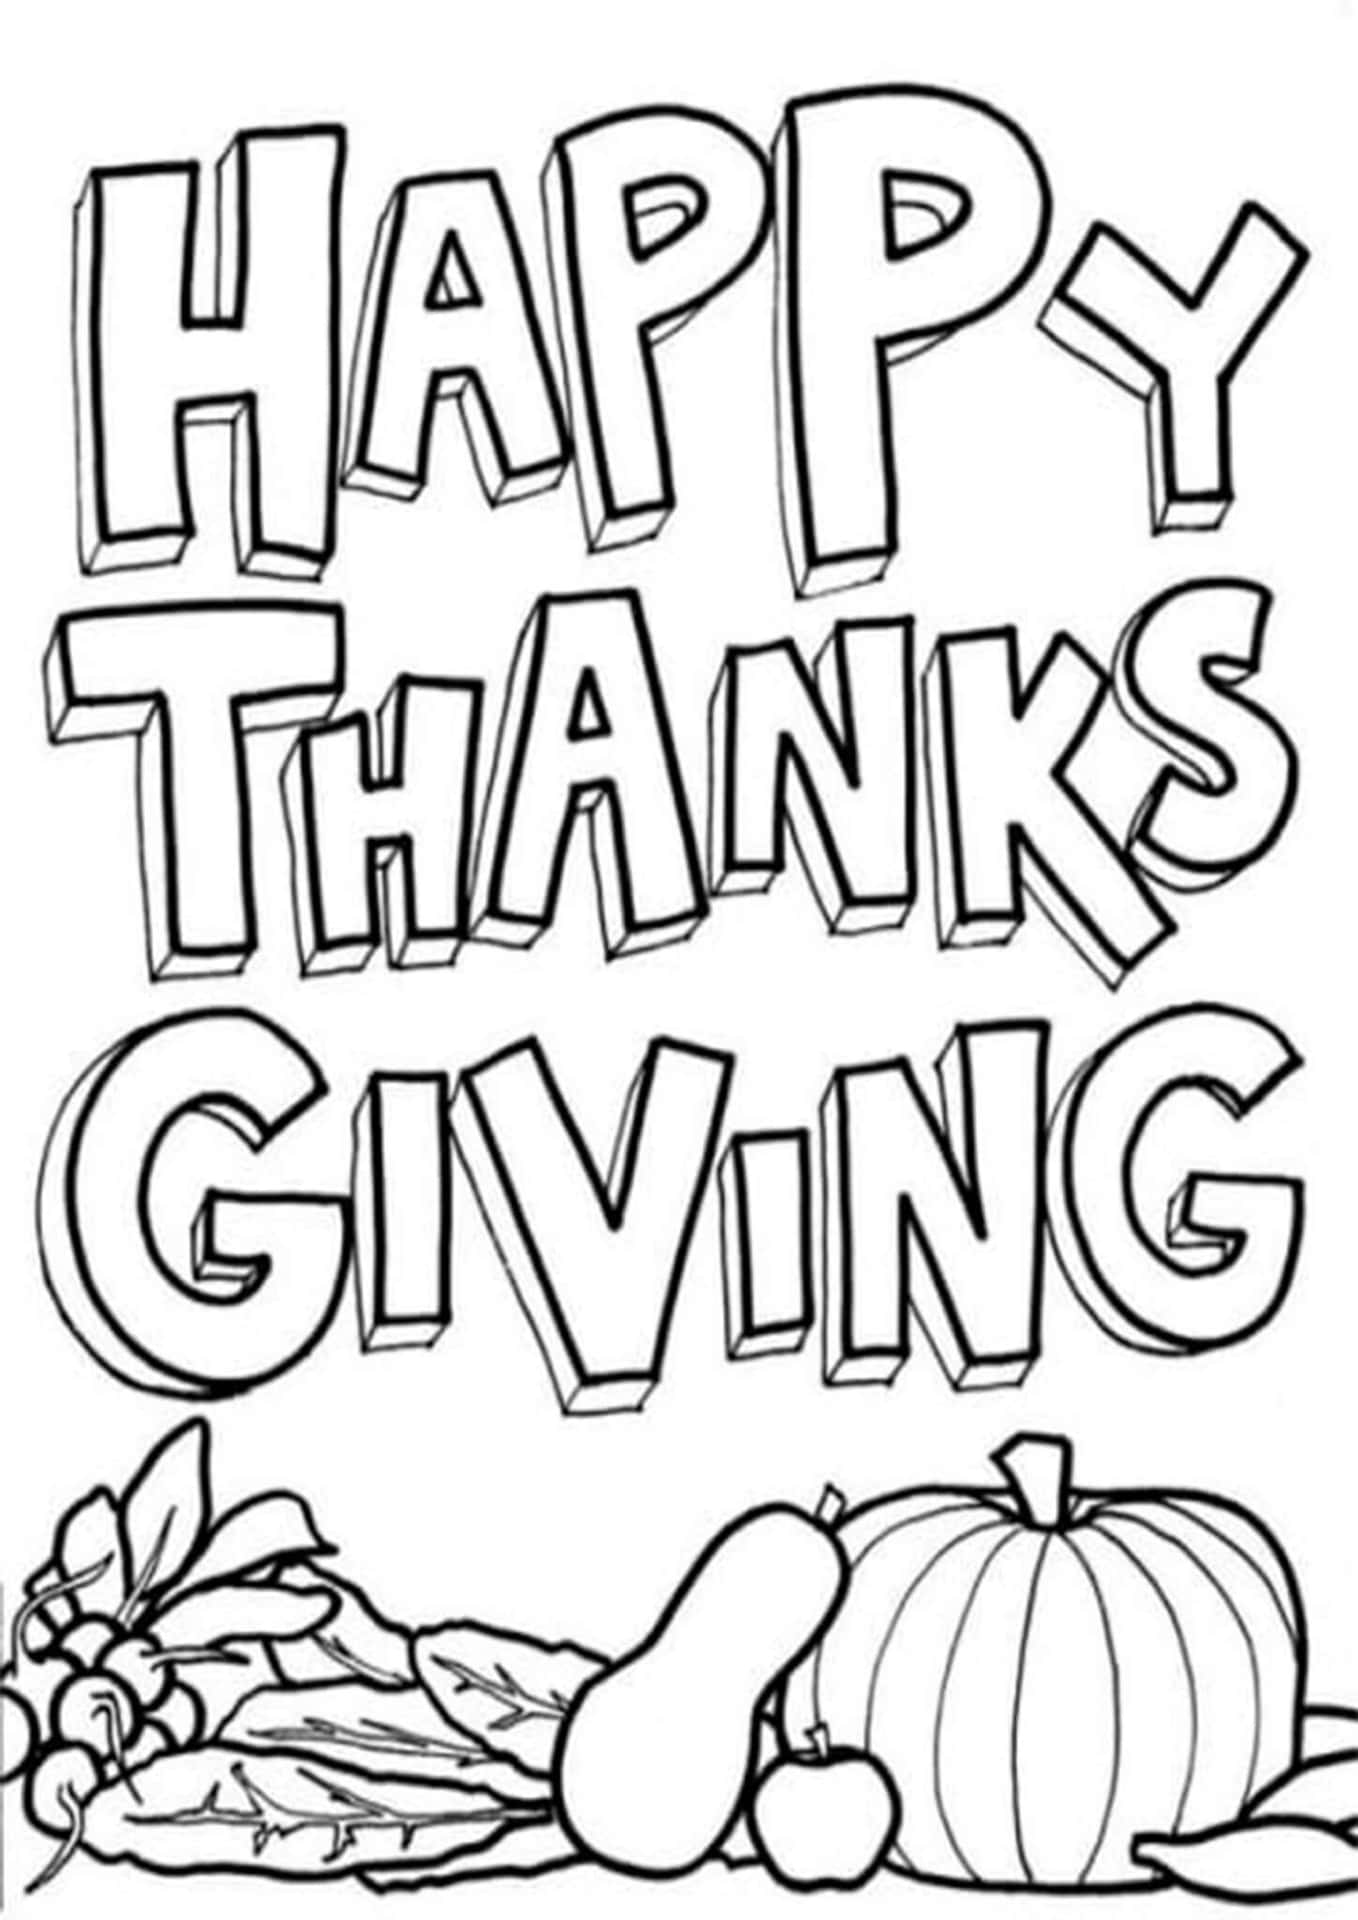 Thanksgiving Coloring Pages For Kids